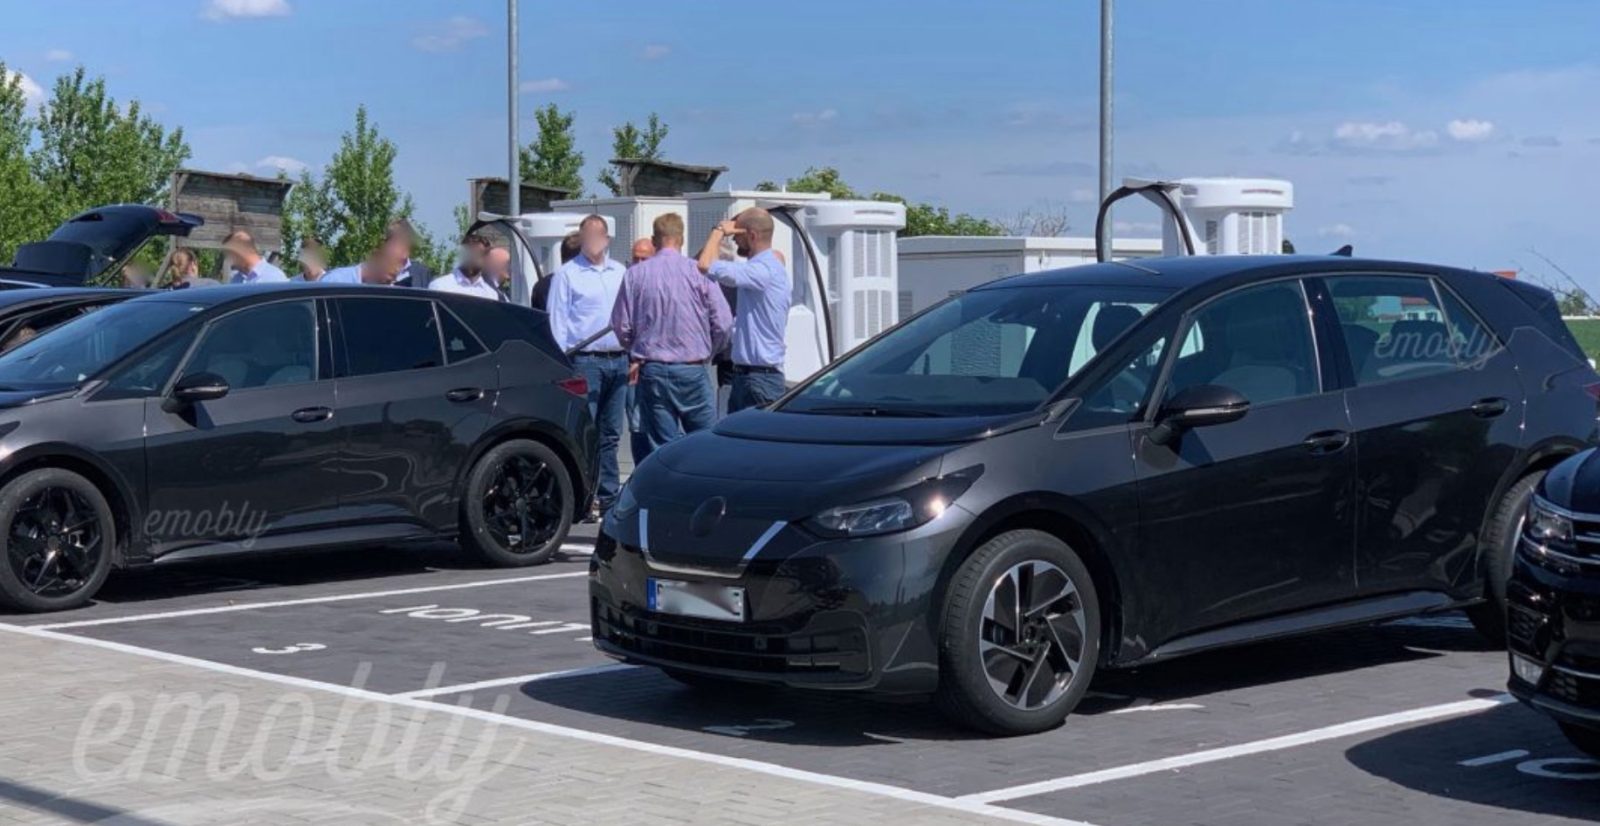 New VW ID3 electric hatchback prototypes spotted in the wild - Electrek1600 x 826